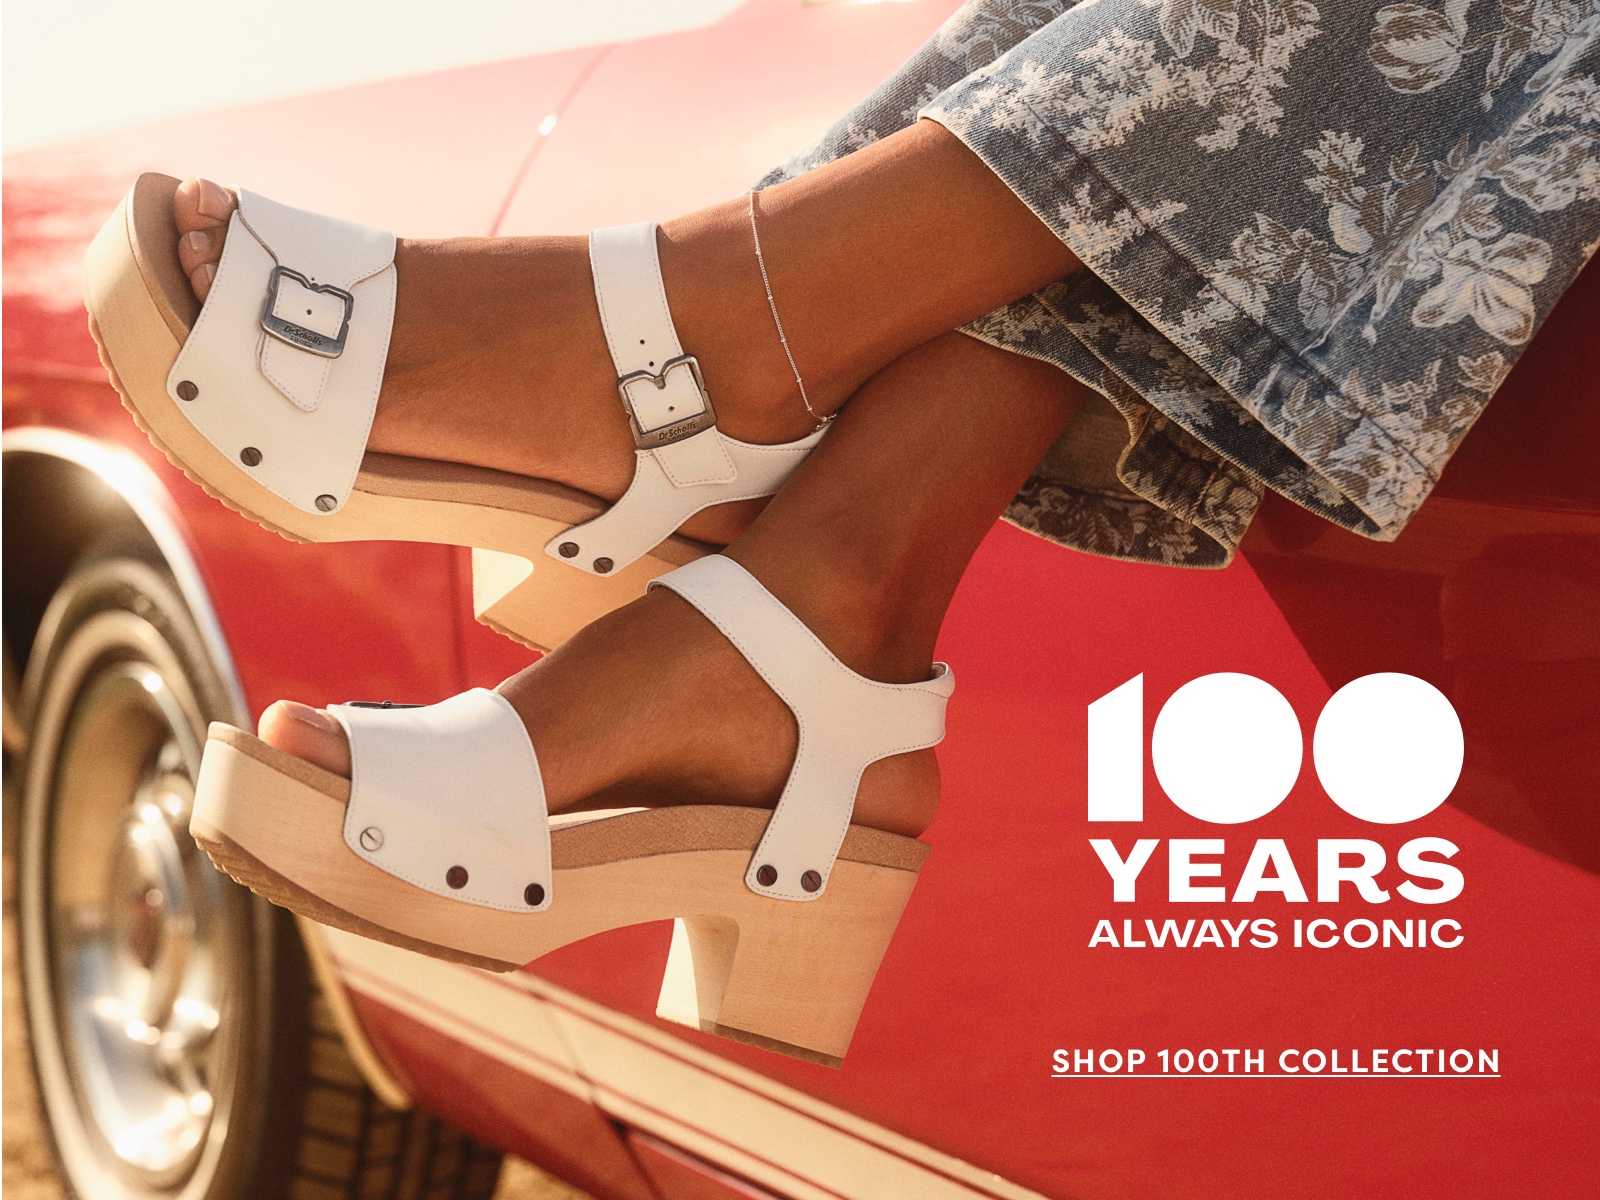 Shop 100 Anniversary Collection